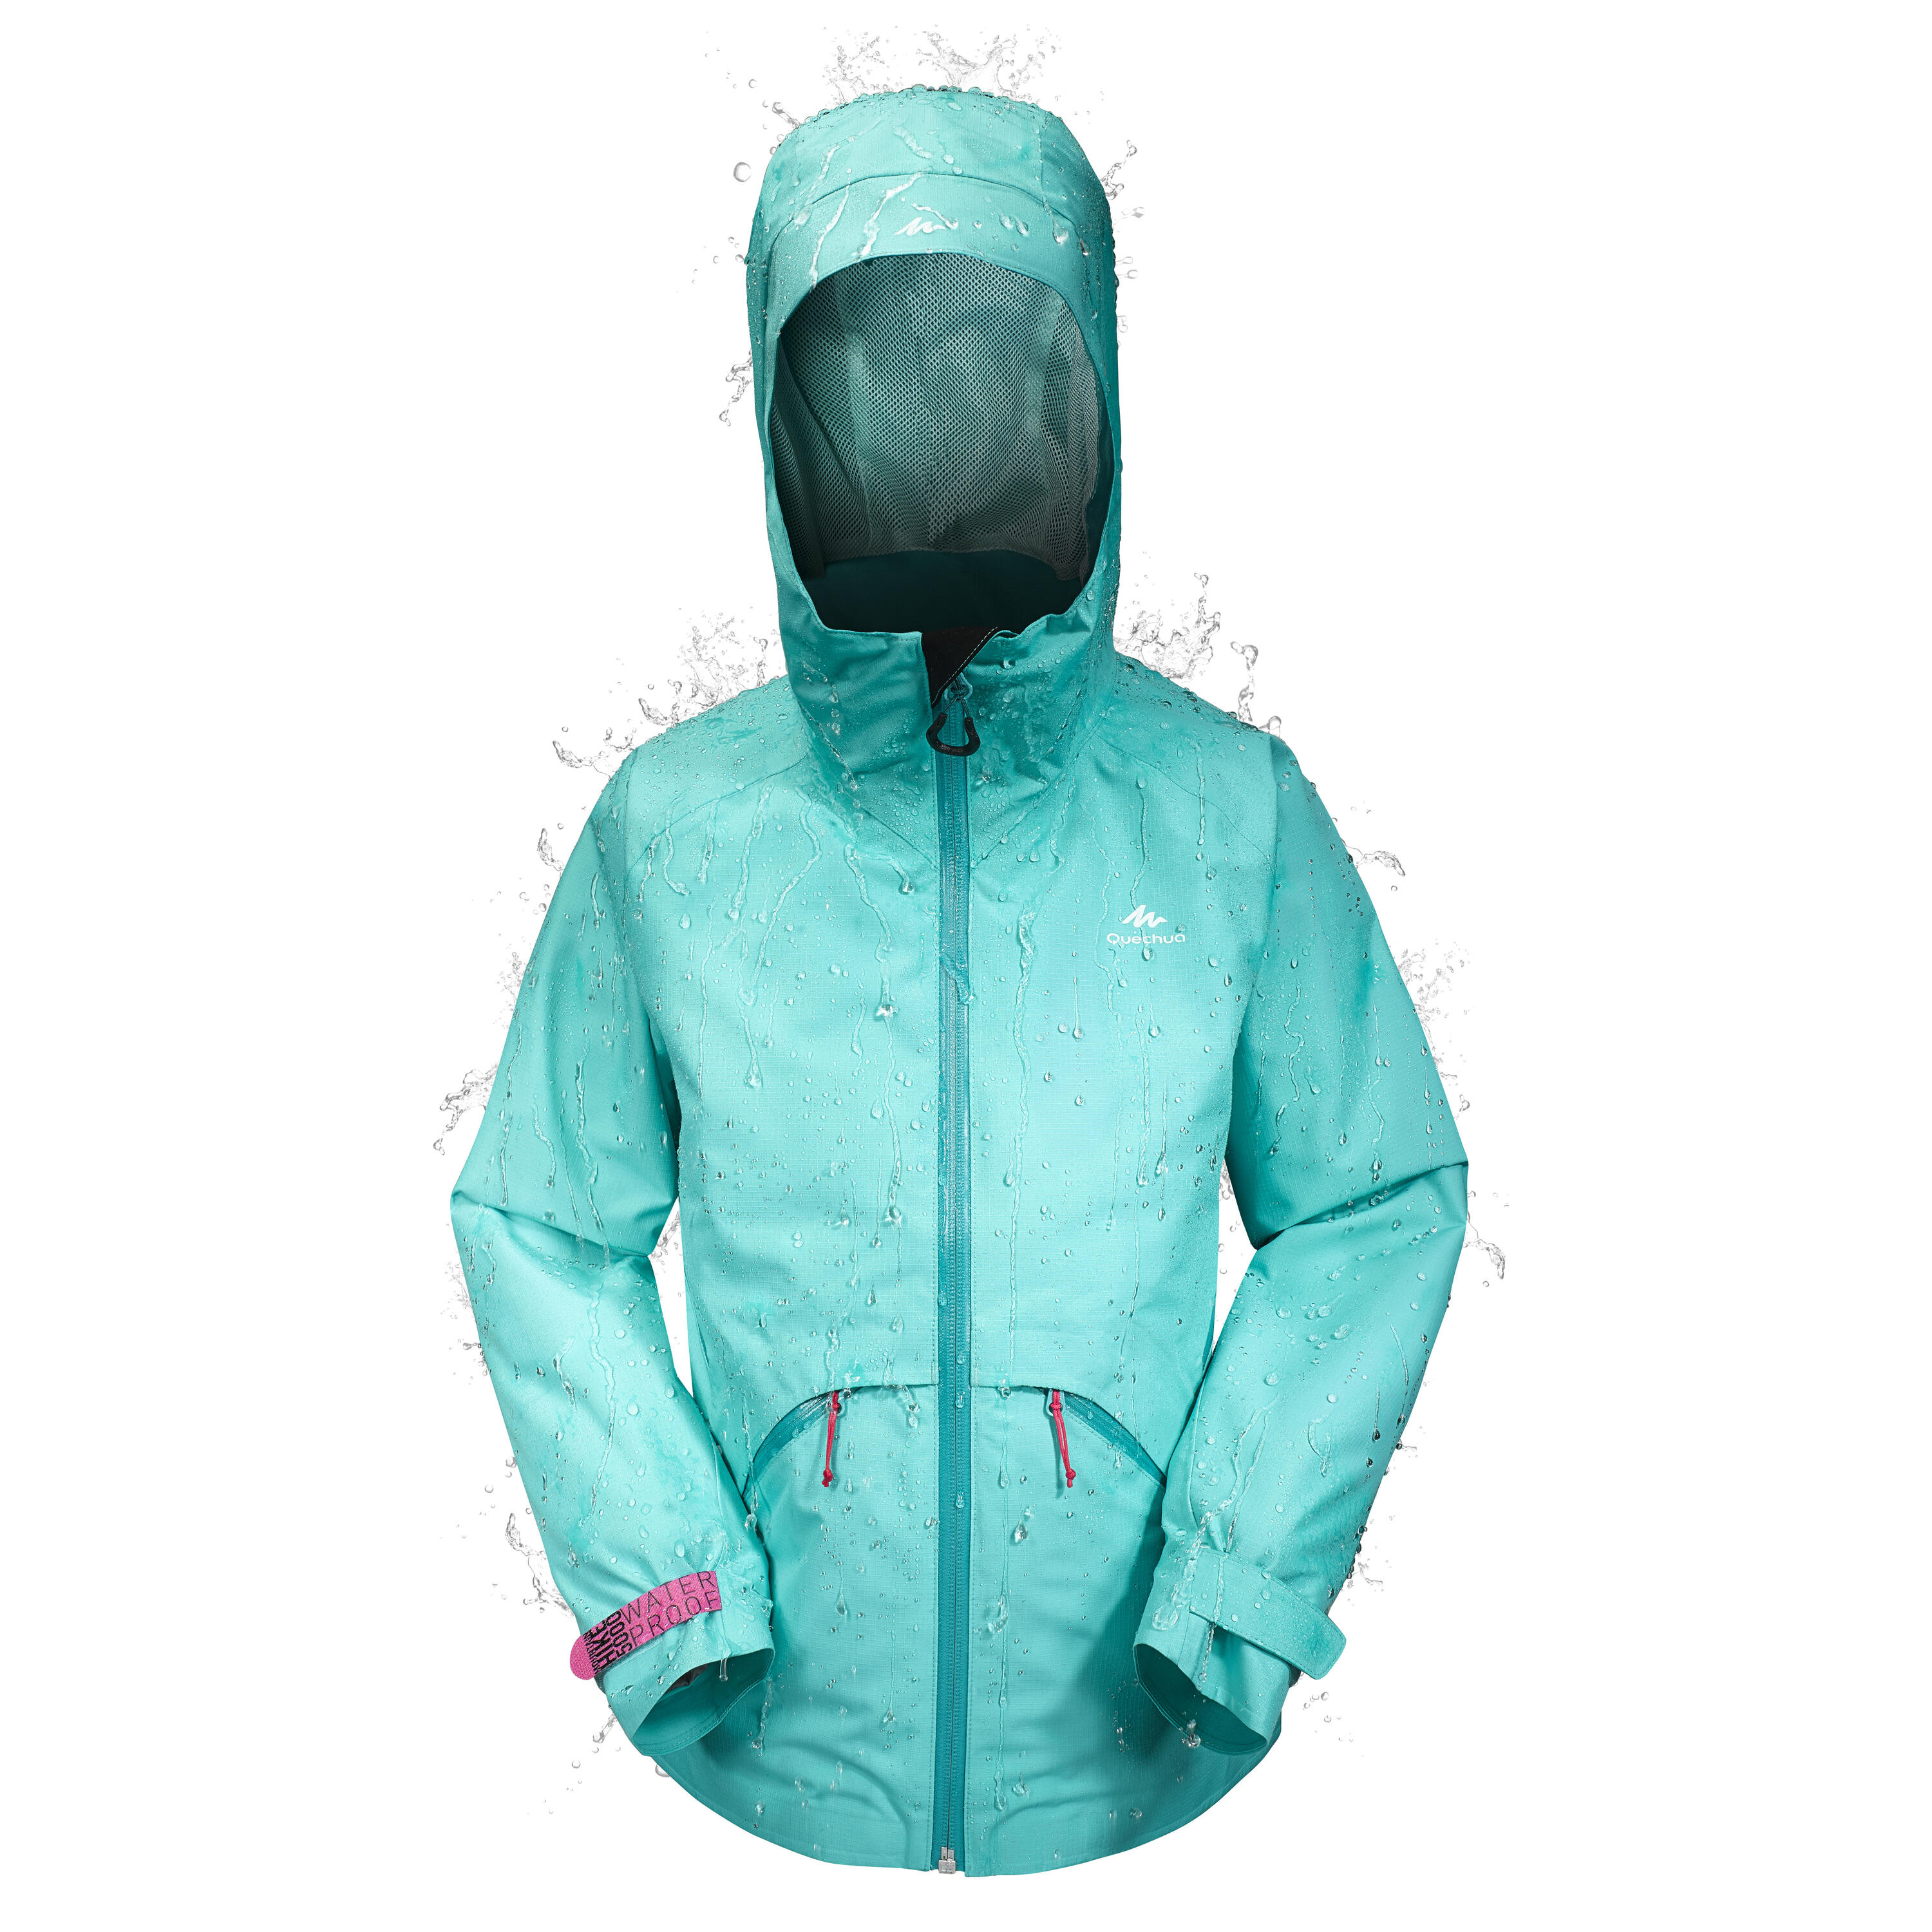 QUECHUA MH550 children's hiking jacket - Turquoise